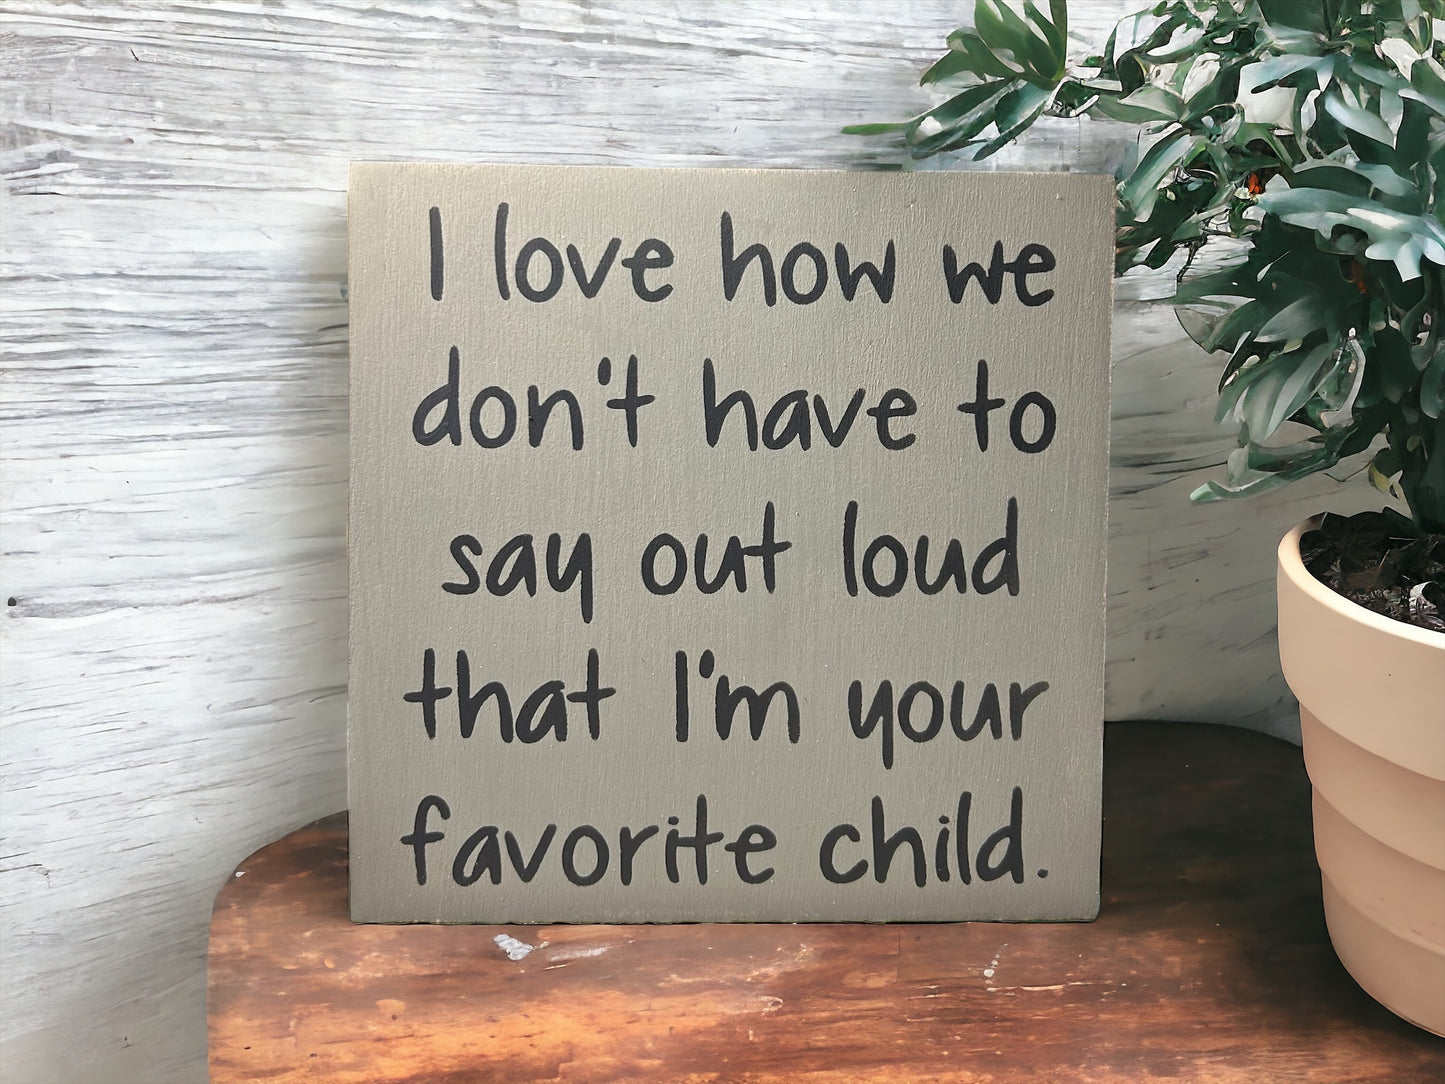 Favorite Child - Funny Rustic Wood White Sign